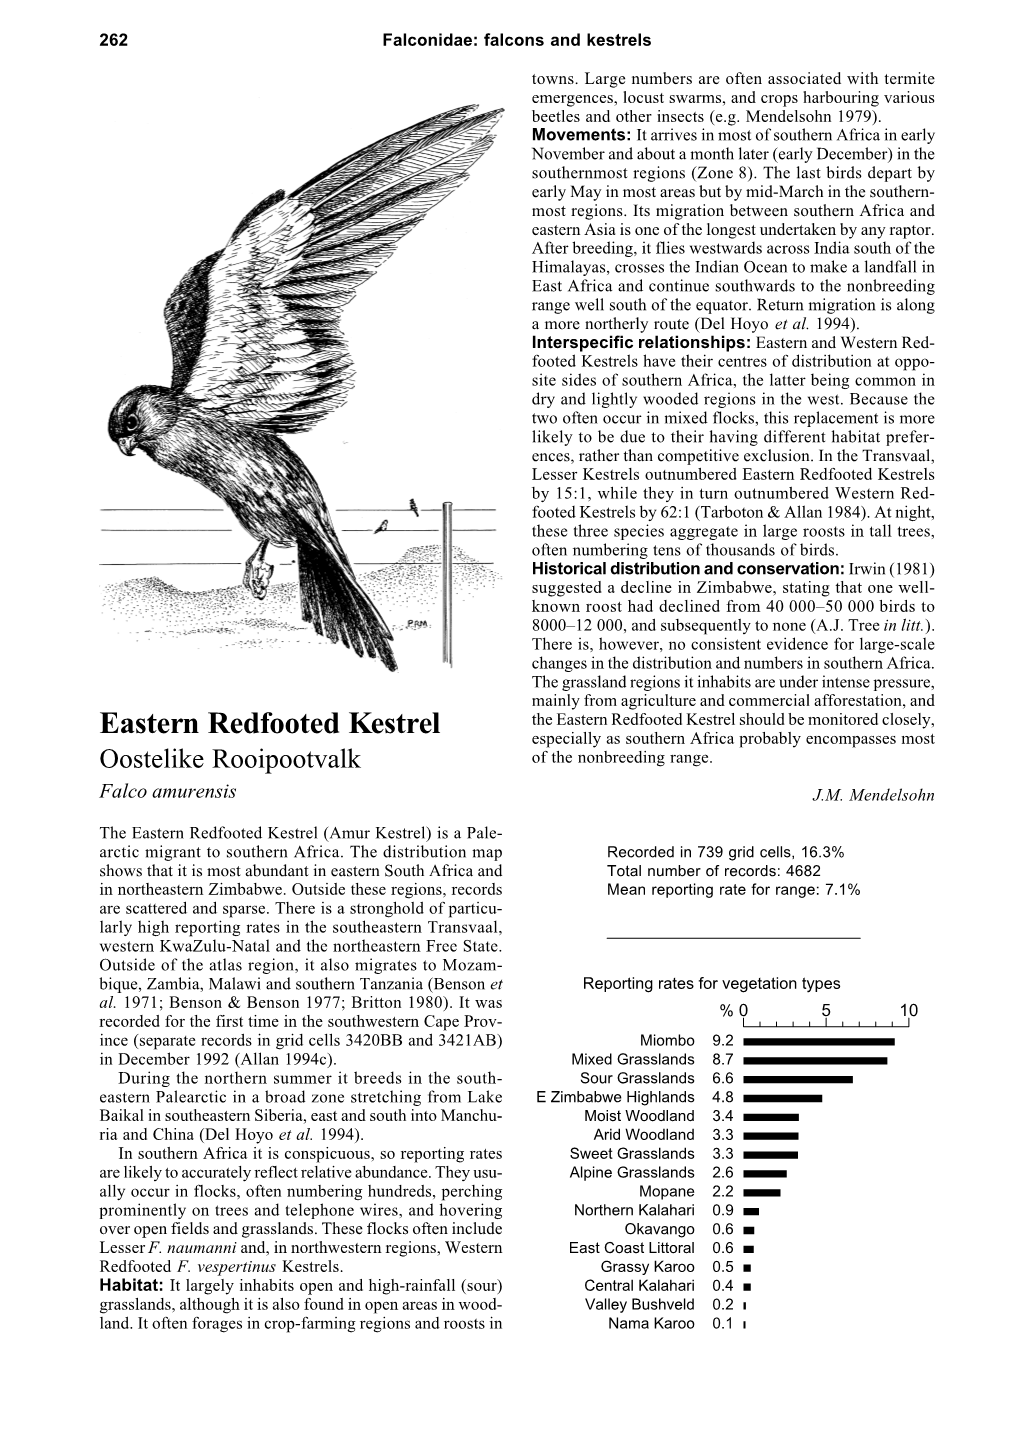 Eastern Redfooted Kestrels by 15:1, While They in Turn Outnumbered Western Red- Footed Kestrels by 62:1 (Tarboton & Allan 1984)